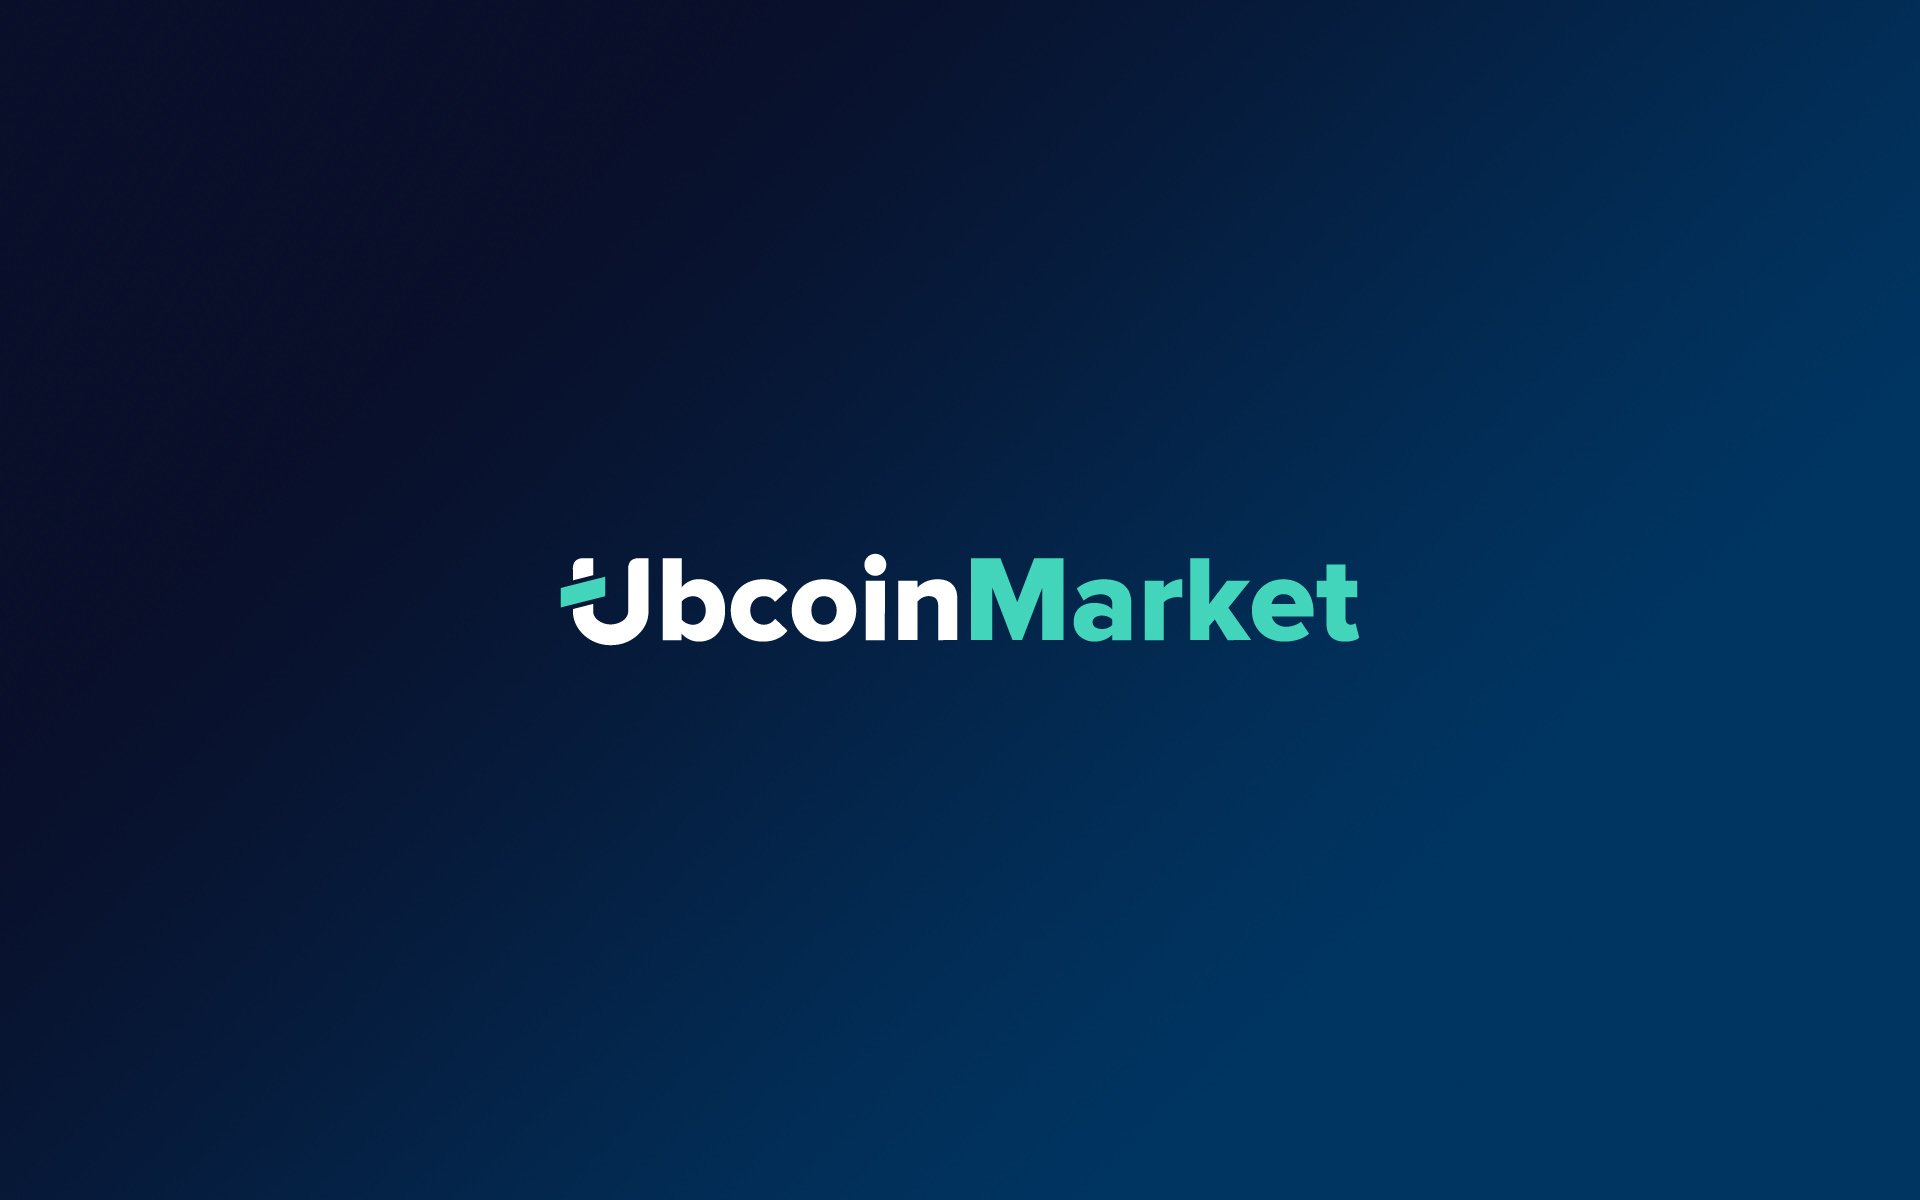 Ubank Receives Investment From Inventure Partners for the Development of Its Blockchain-Based Platform Ubcoin Market